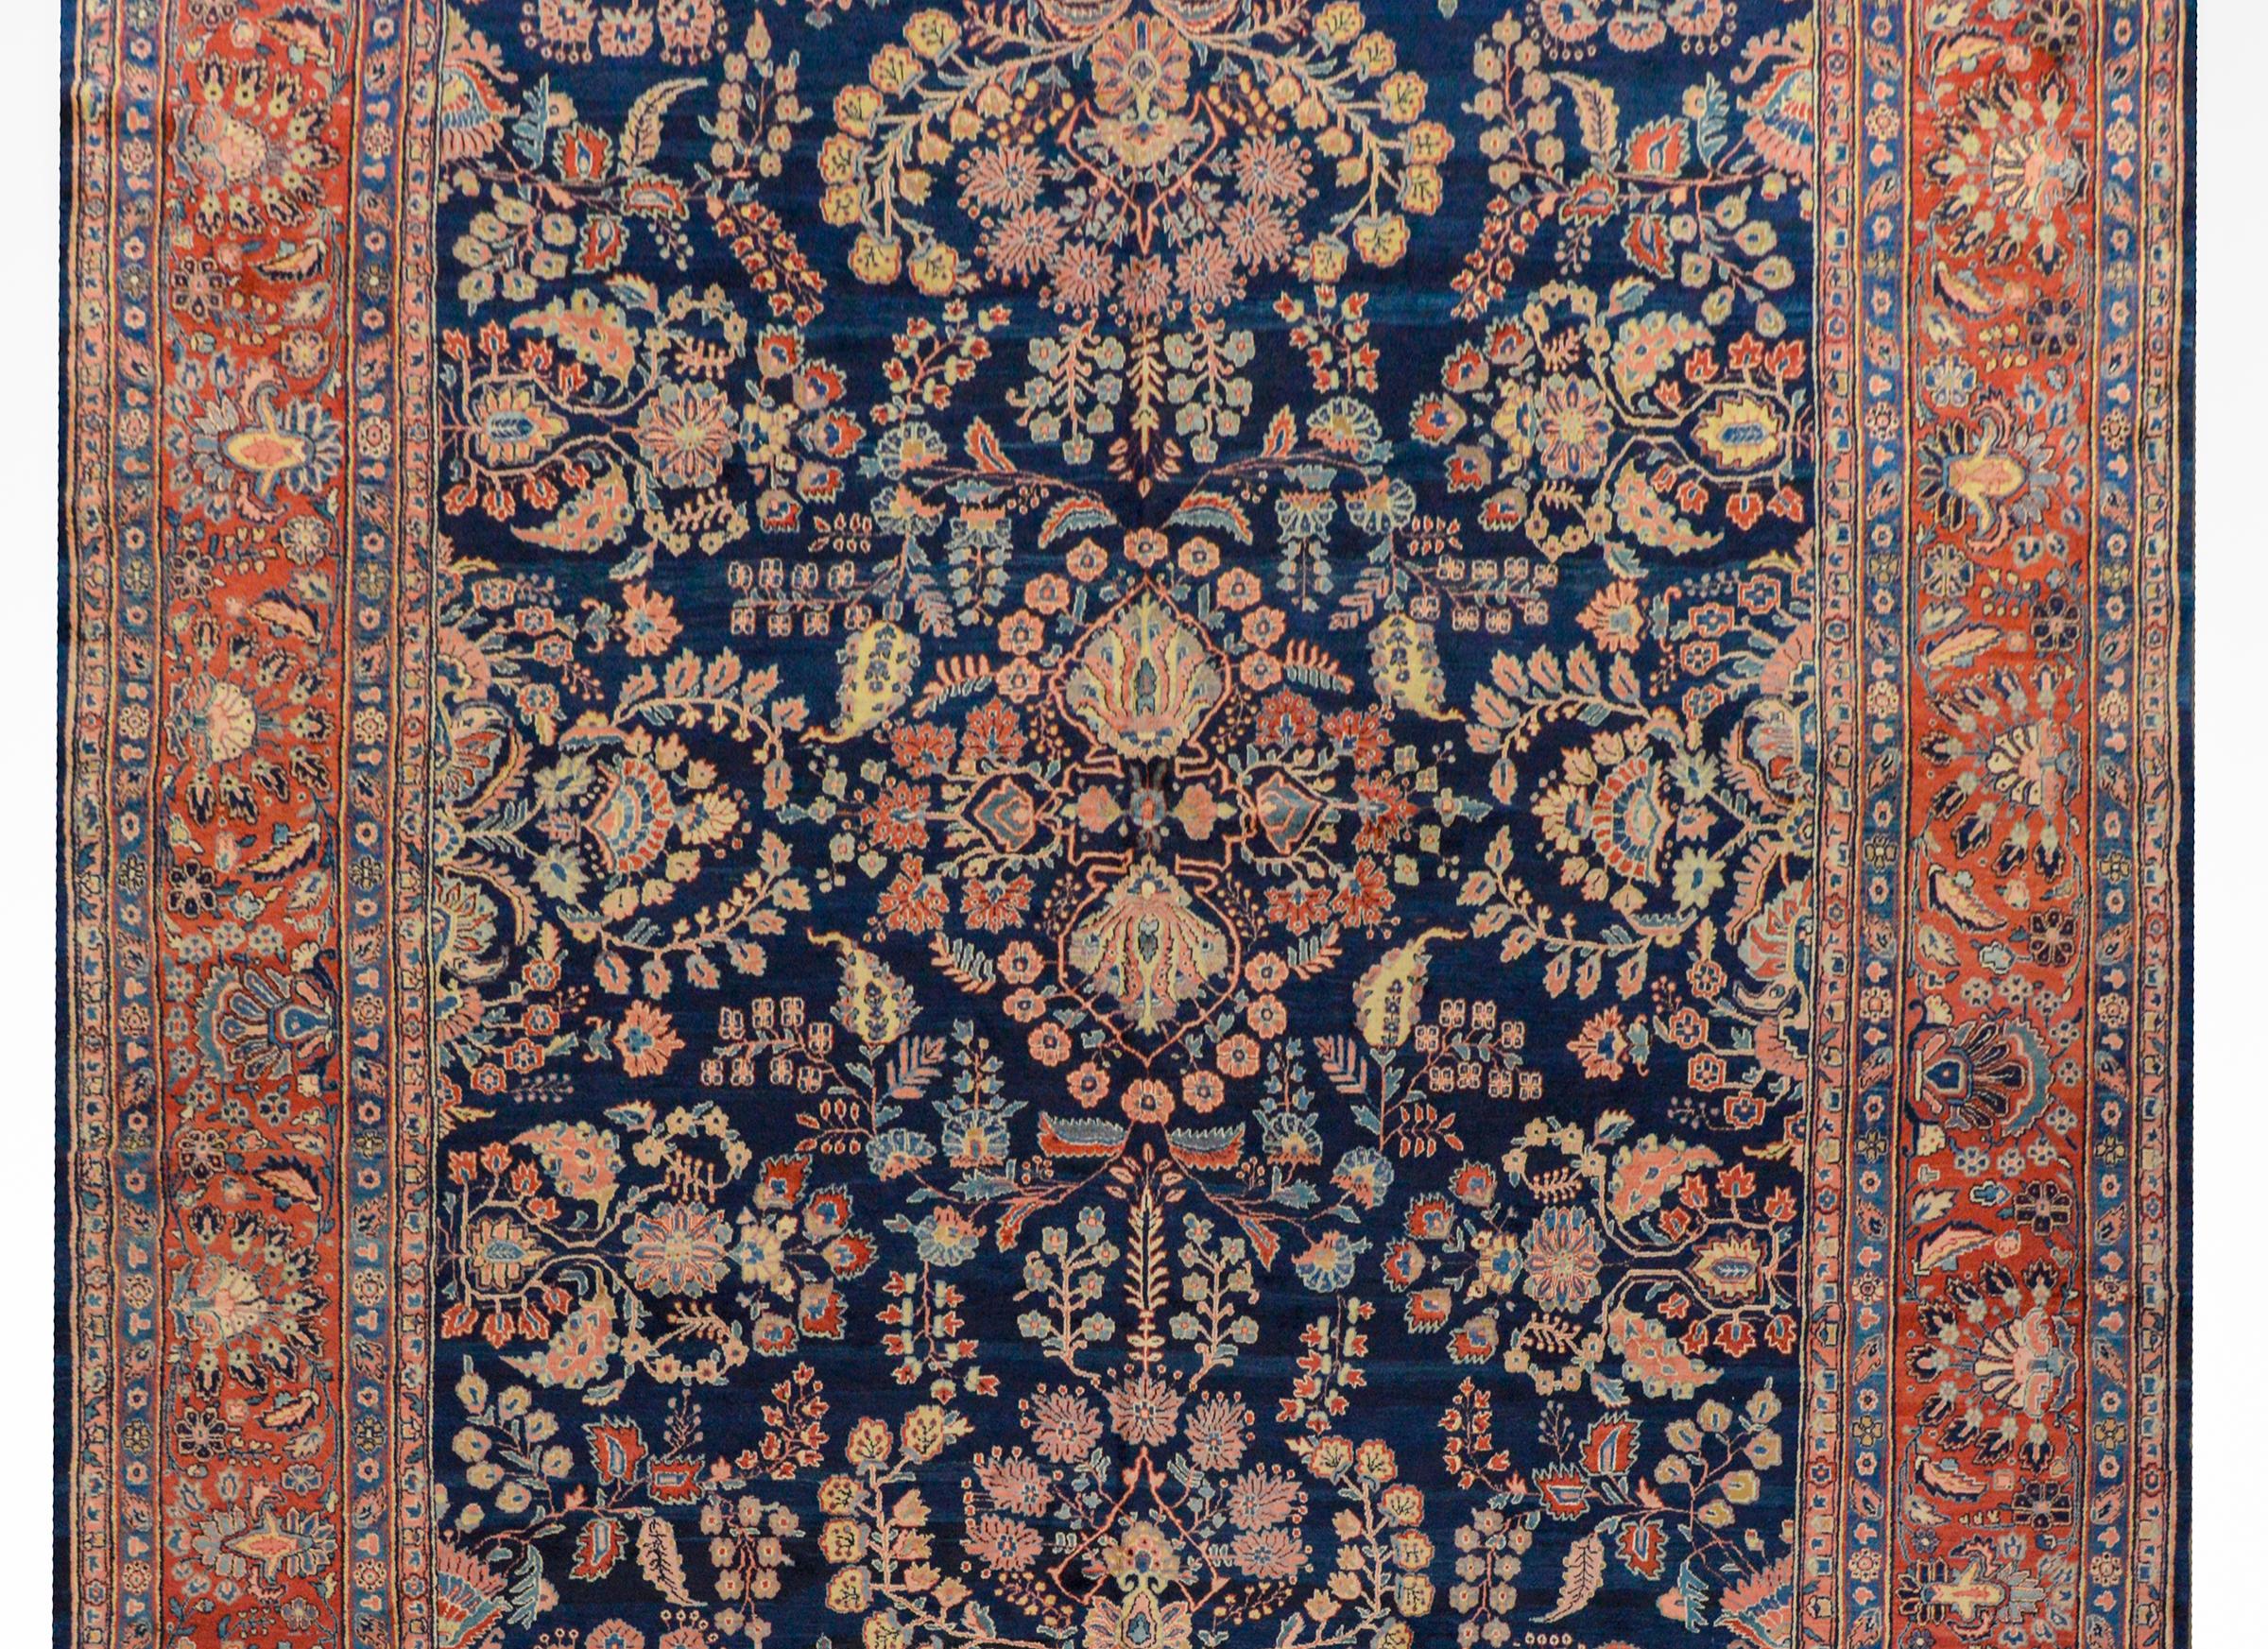 A fabulous early 20th century Persian Mohajeran rug with a bold all-over mirrored floral pattern with myriad varieties of flowers and vines woven in crimson, light indigo, cream, and pink vegetable dyed wool, on a dark indigo background. The border